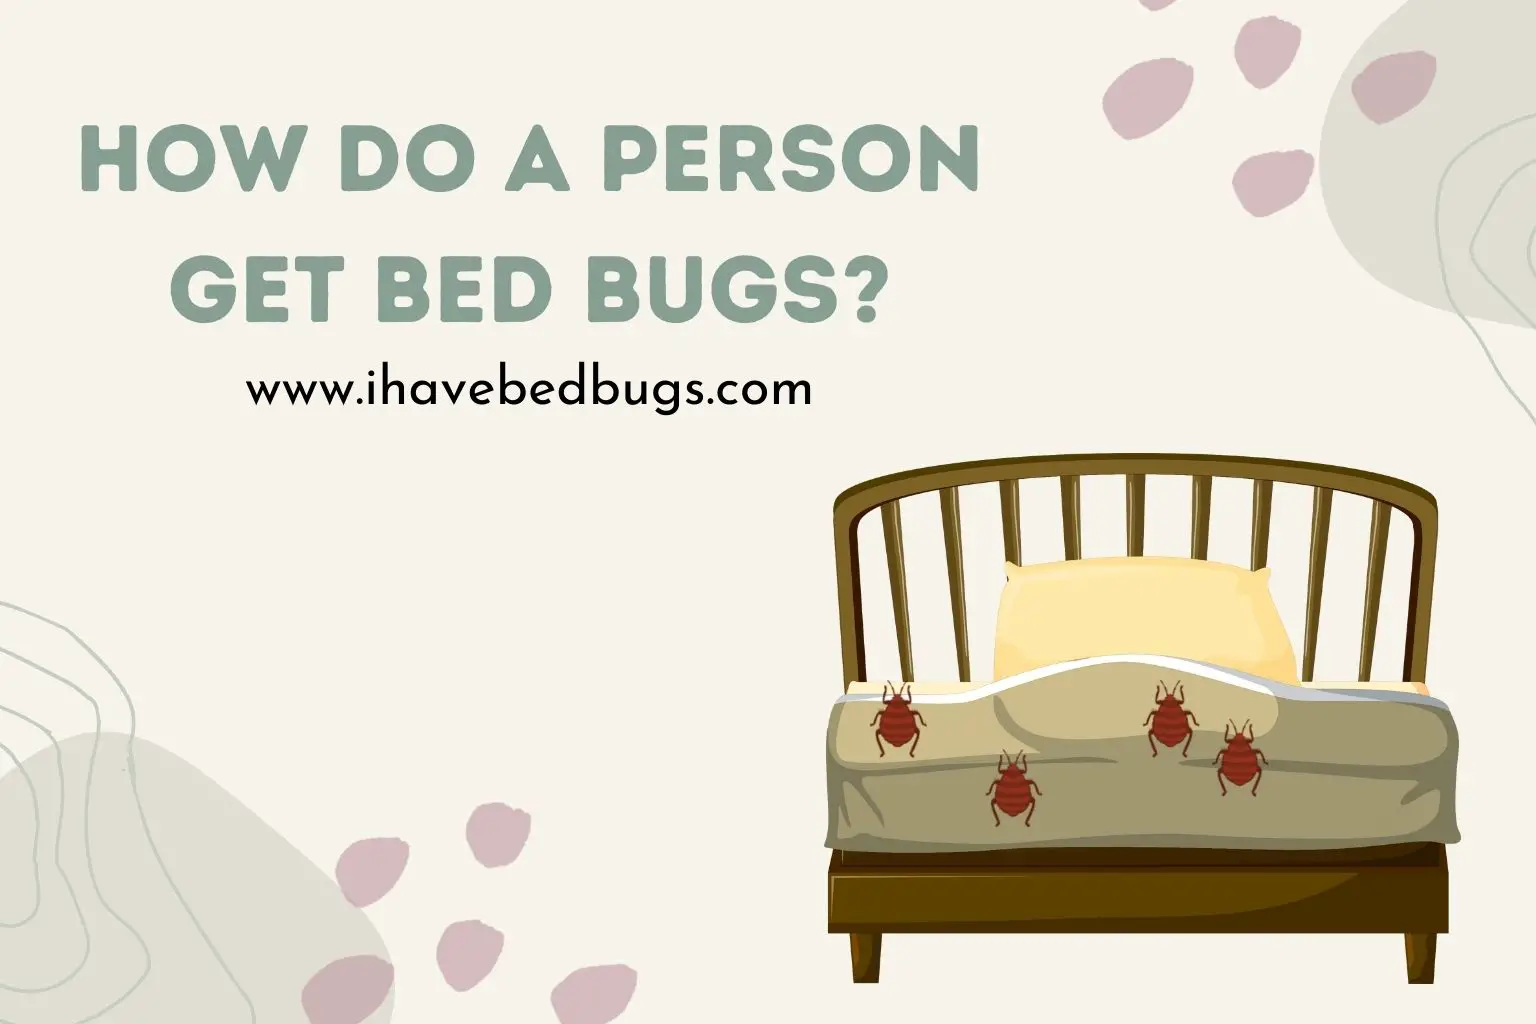 How do a person get bed bugs